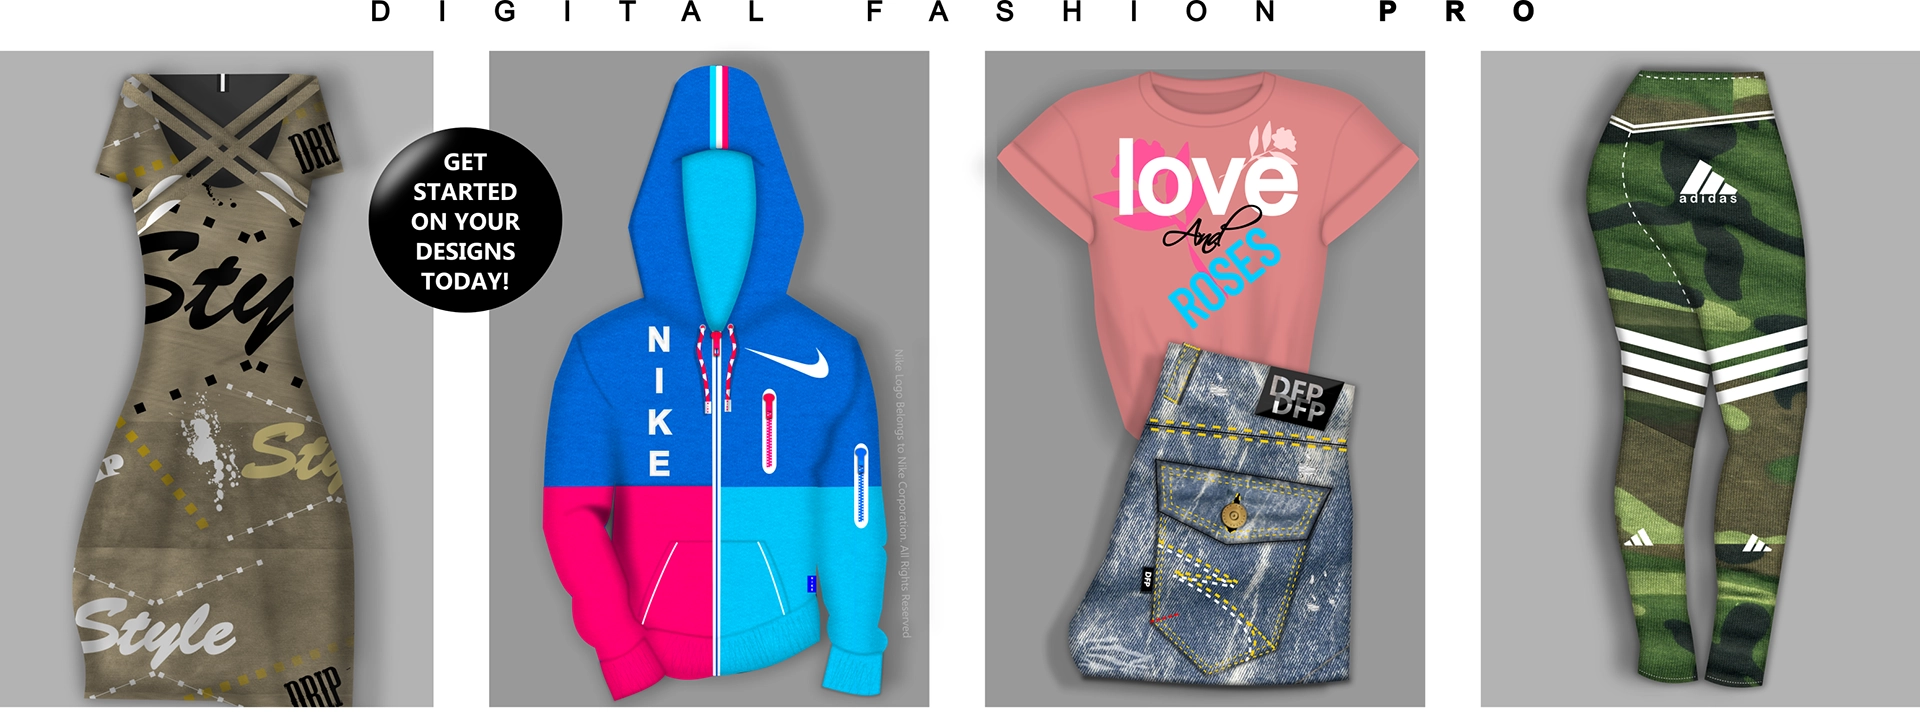 Digital Fashion Pro - Fashion Design Software - Design Your Own Clothes Sketches - Top Collage - dress - nike jacket - love tshirt